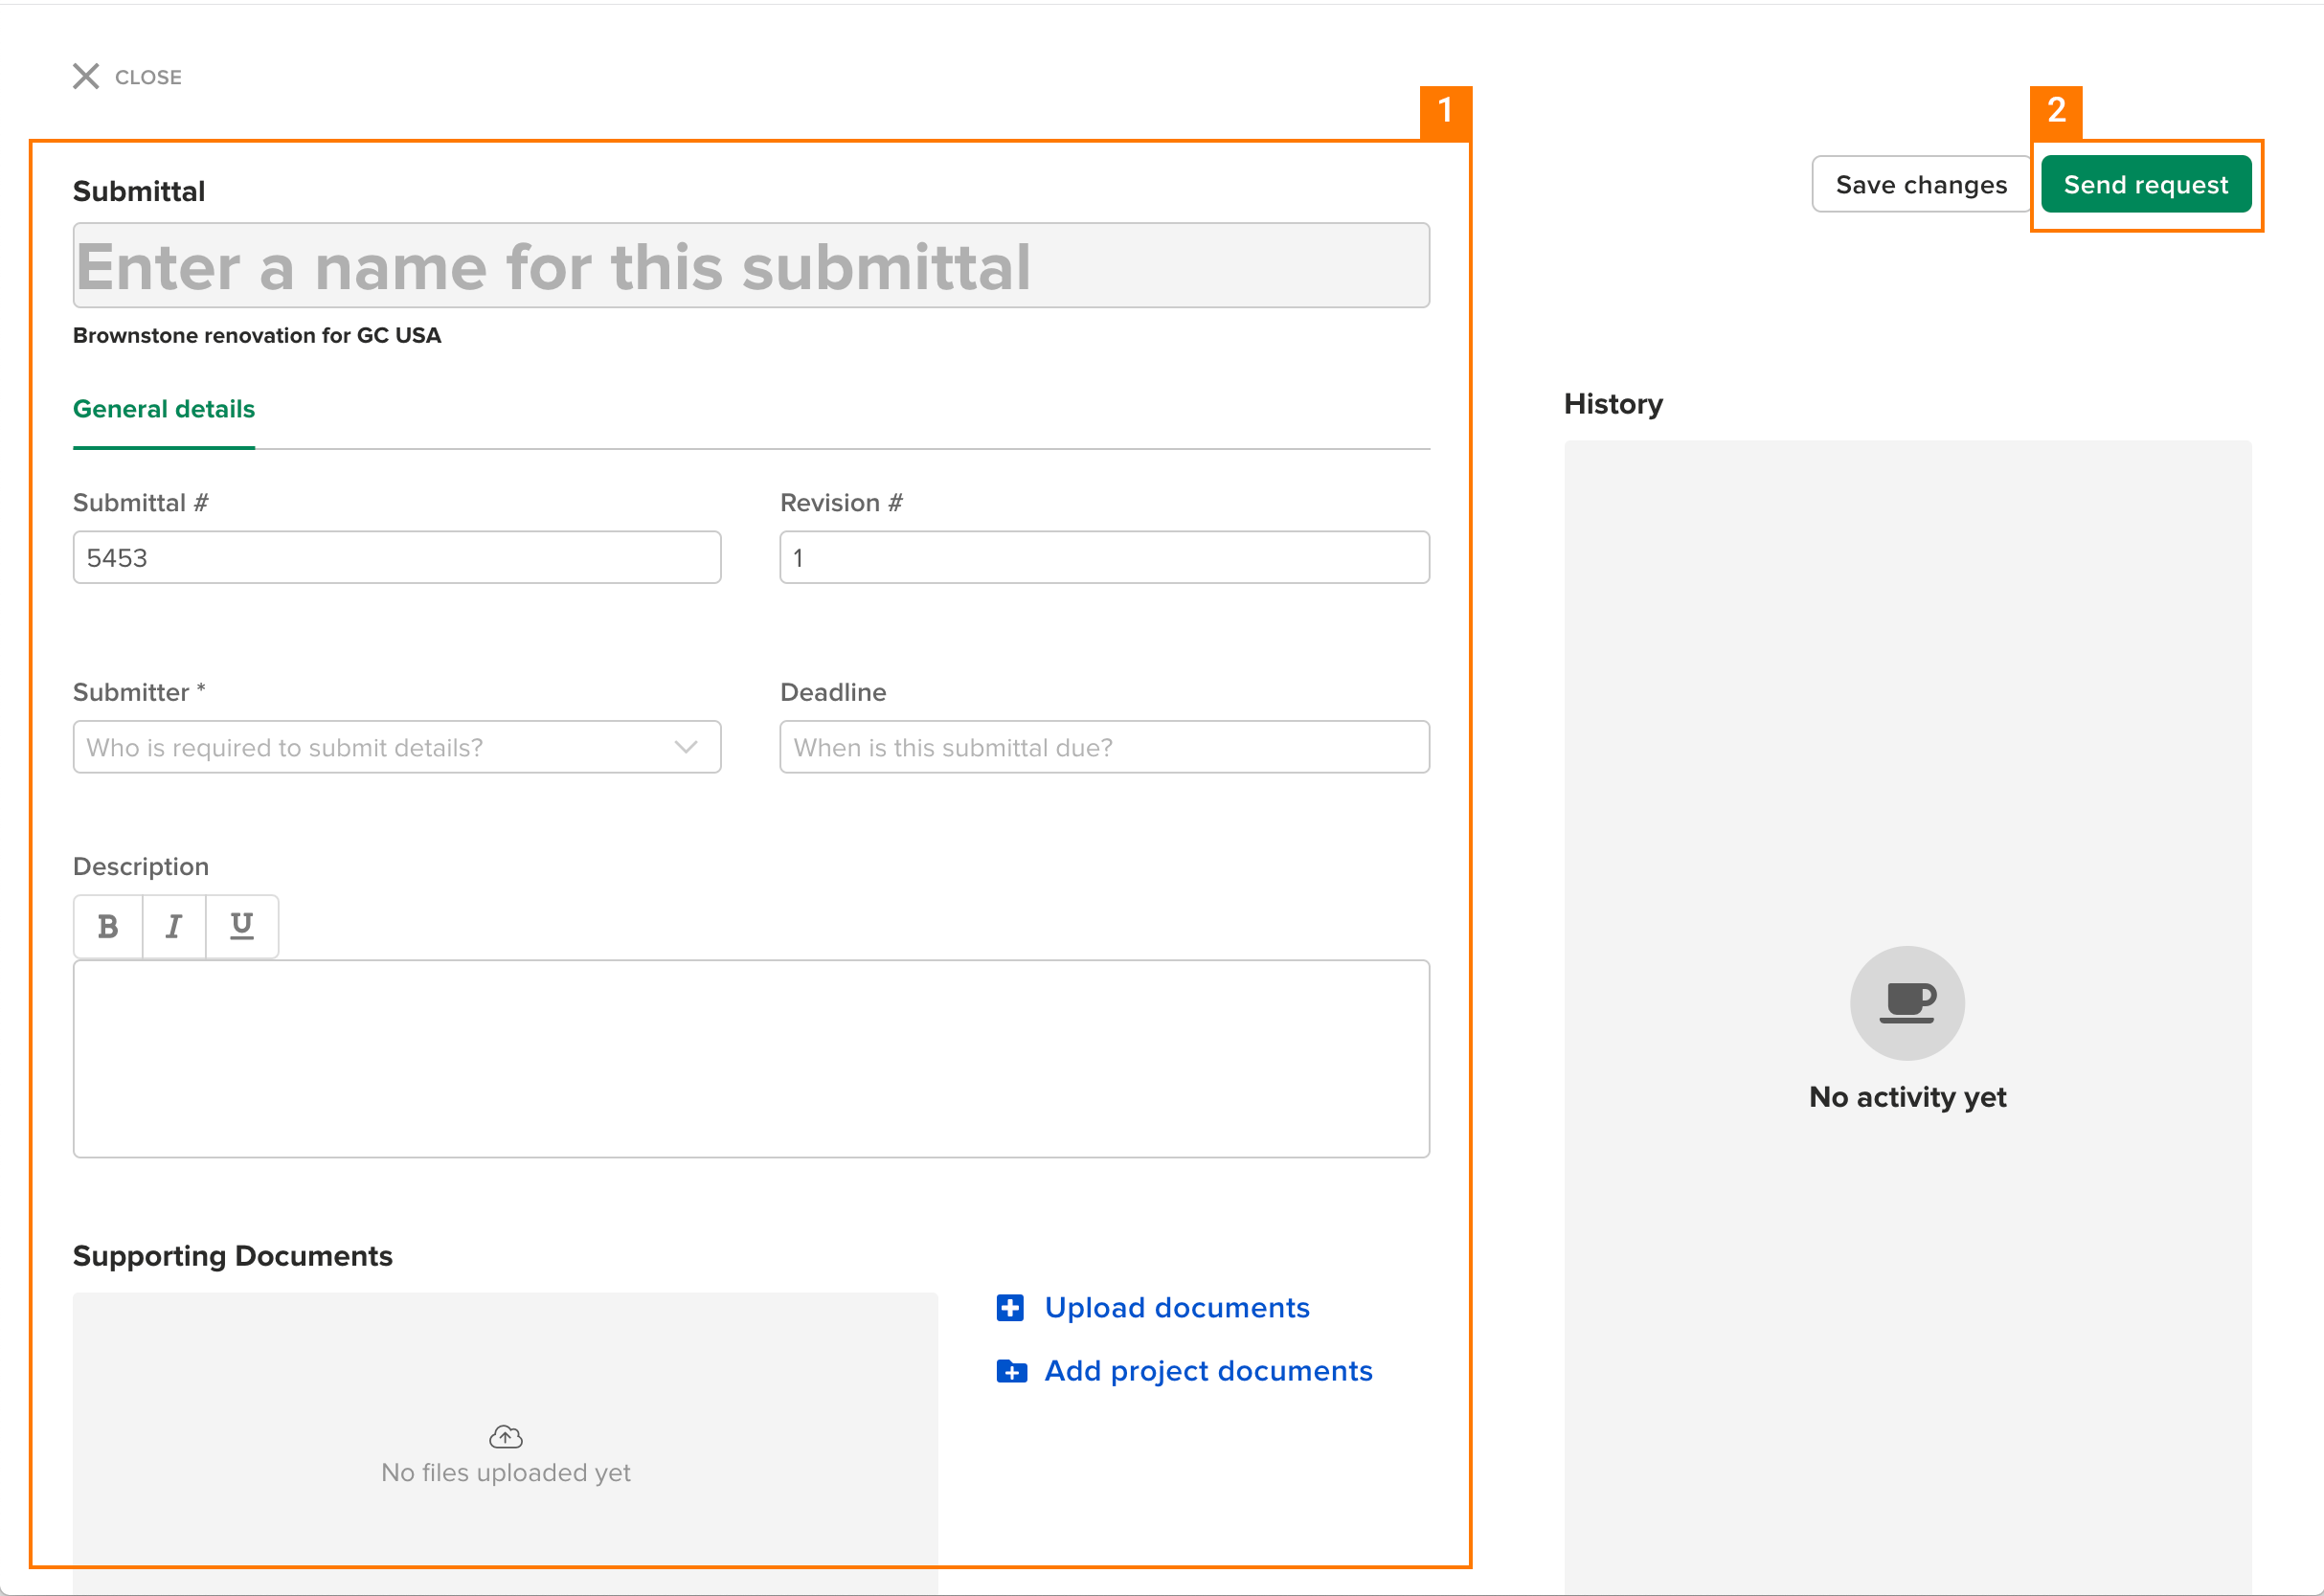 Knowify | Submittals | Screenshot of the submittal form to fill out and send to your vendor